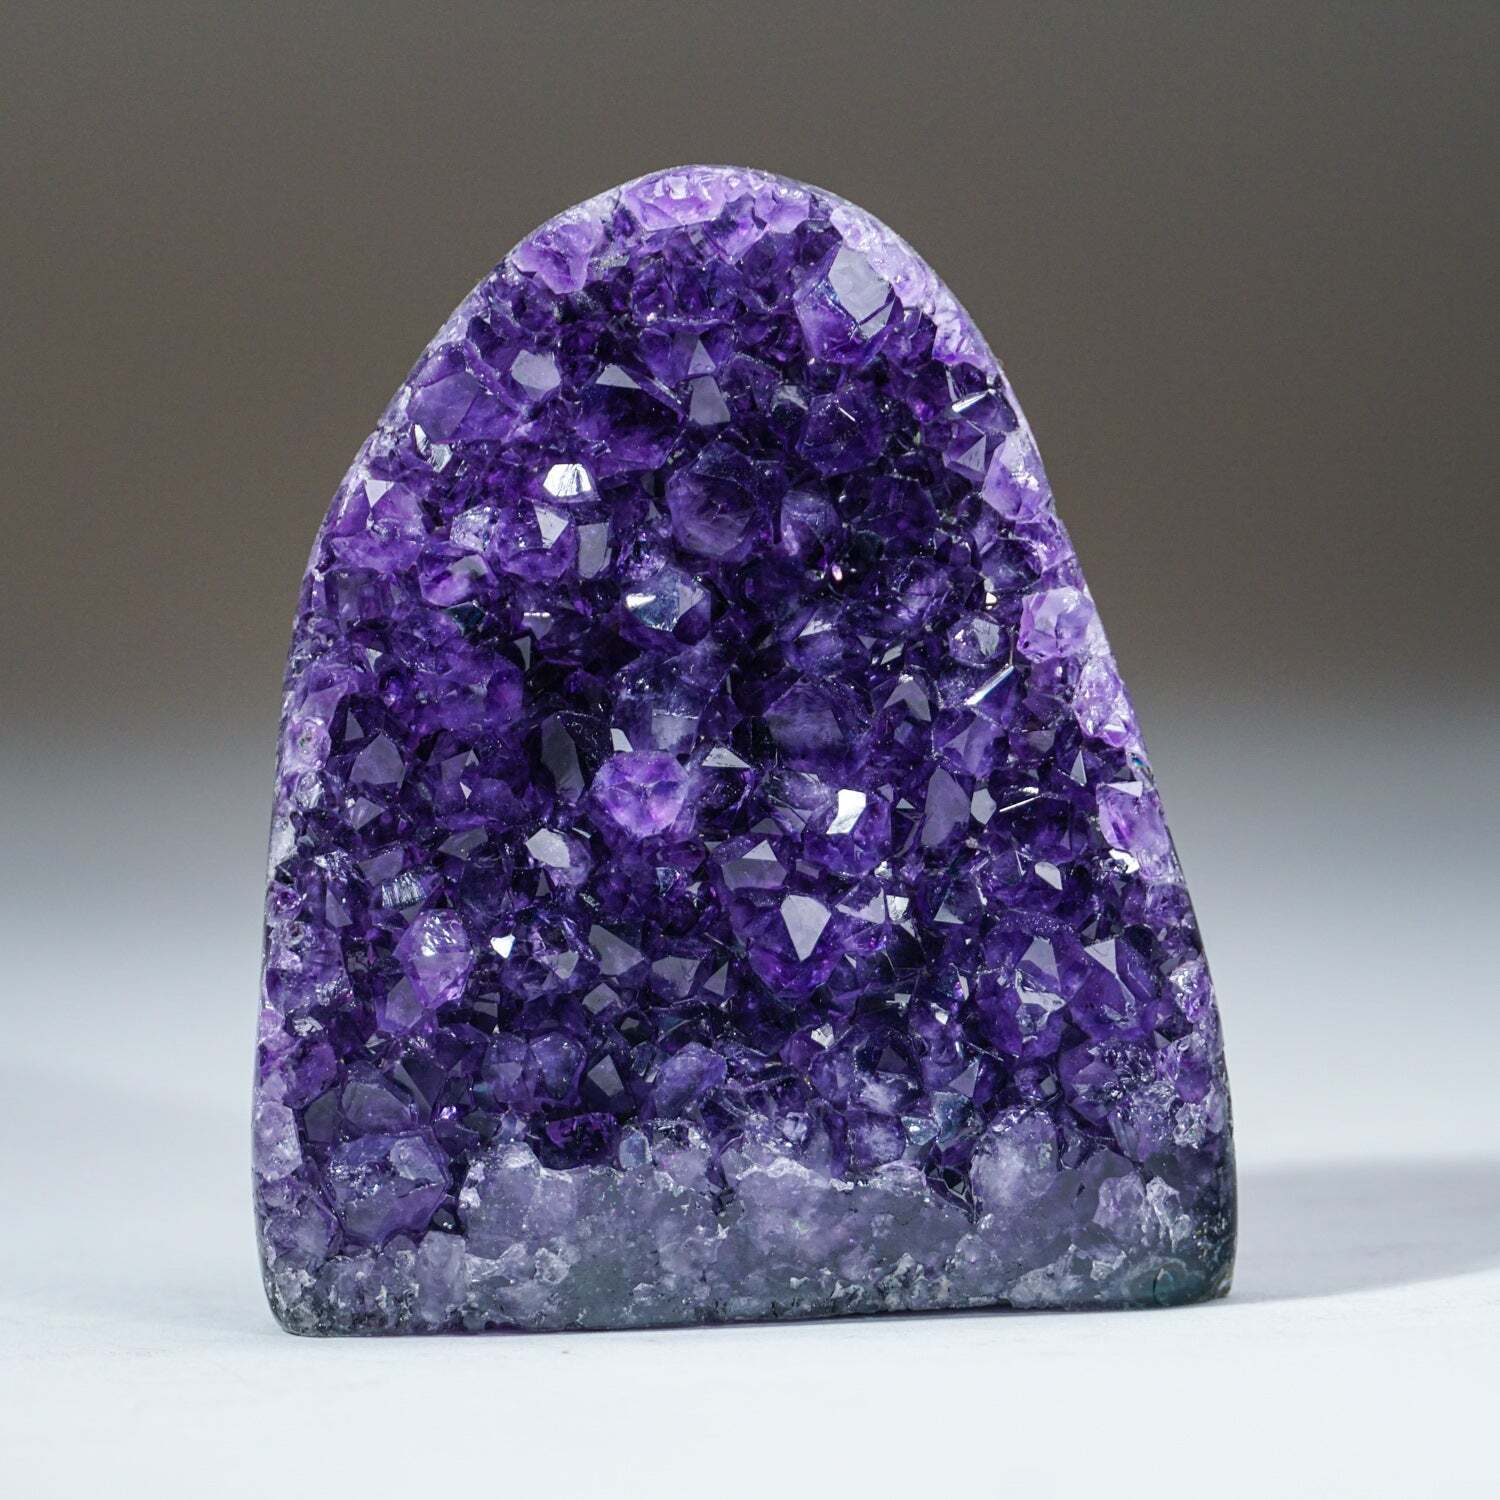 Genuine Amethyst Crystal Cluster from Brazil (1.2 lbs)